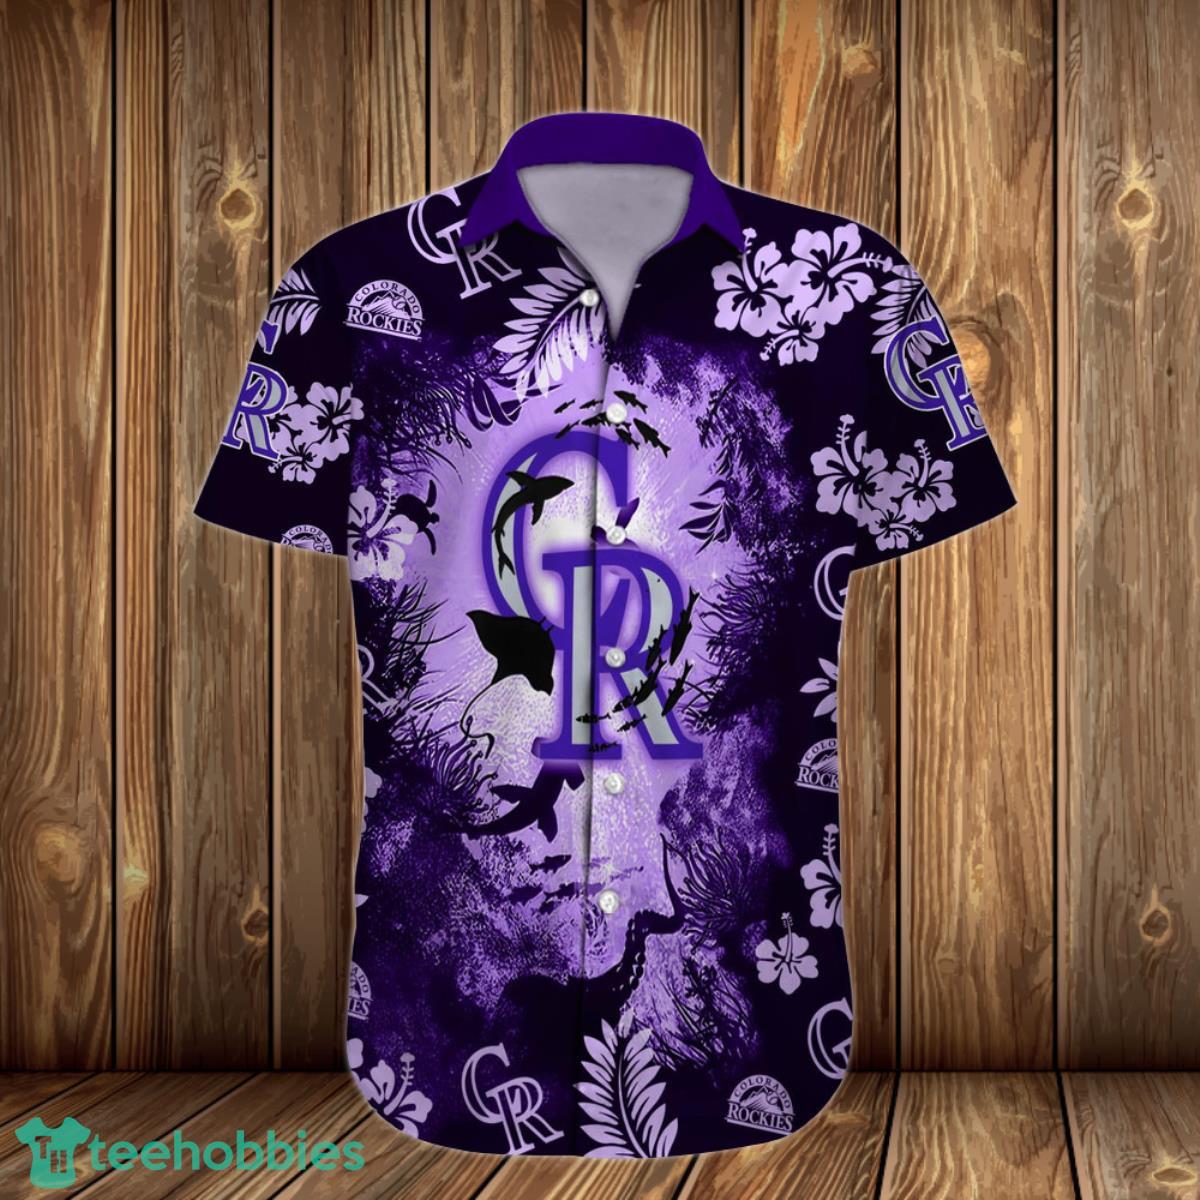 Colorado Rockies MLB Flower Hawaiian Shirt Unique Gift For Men And Women  Fans - Freedomdesign